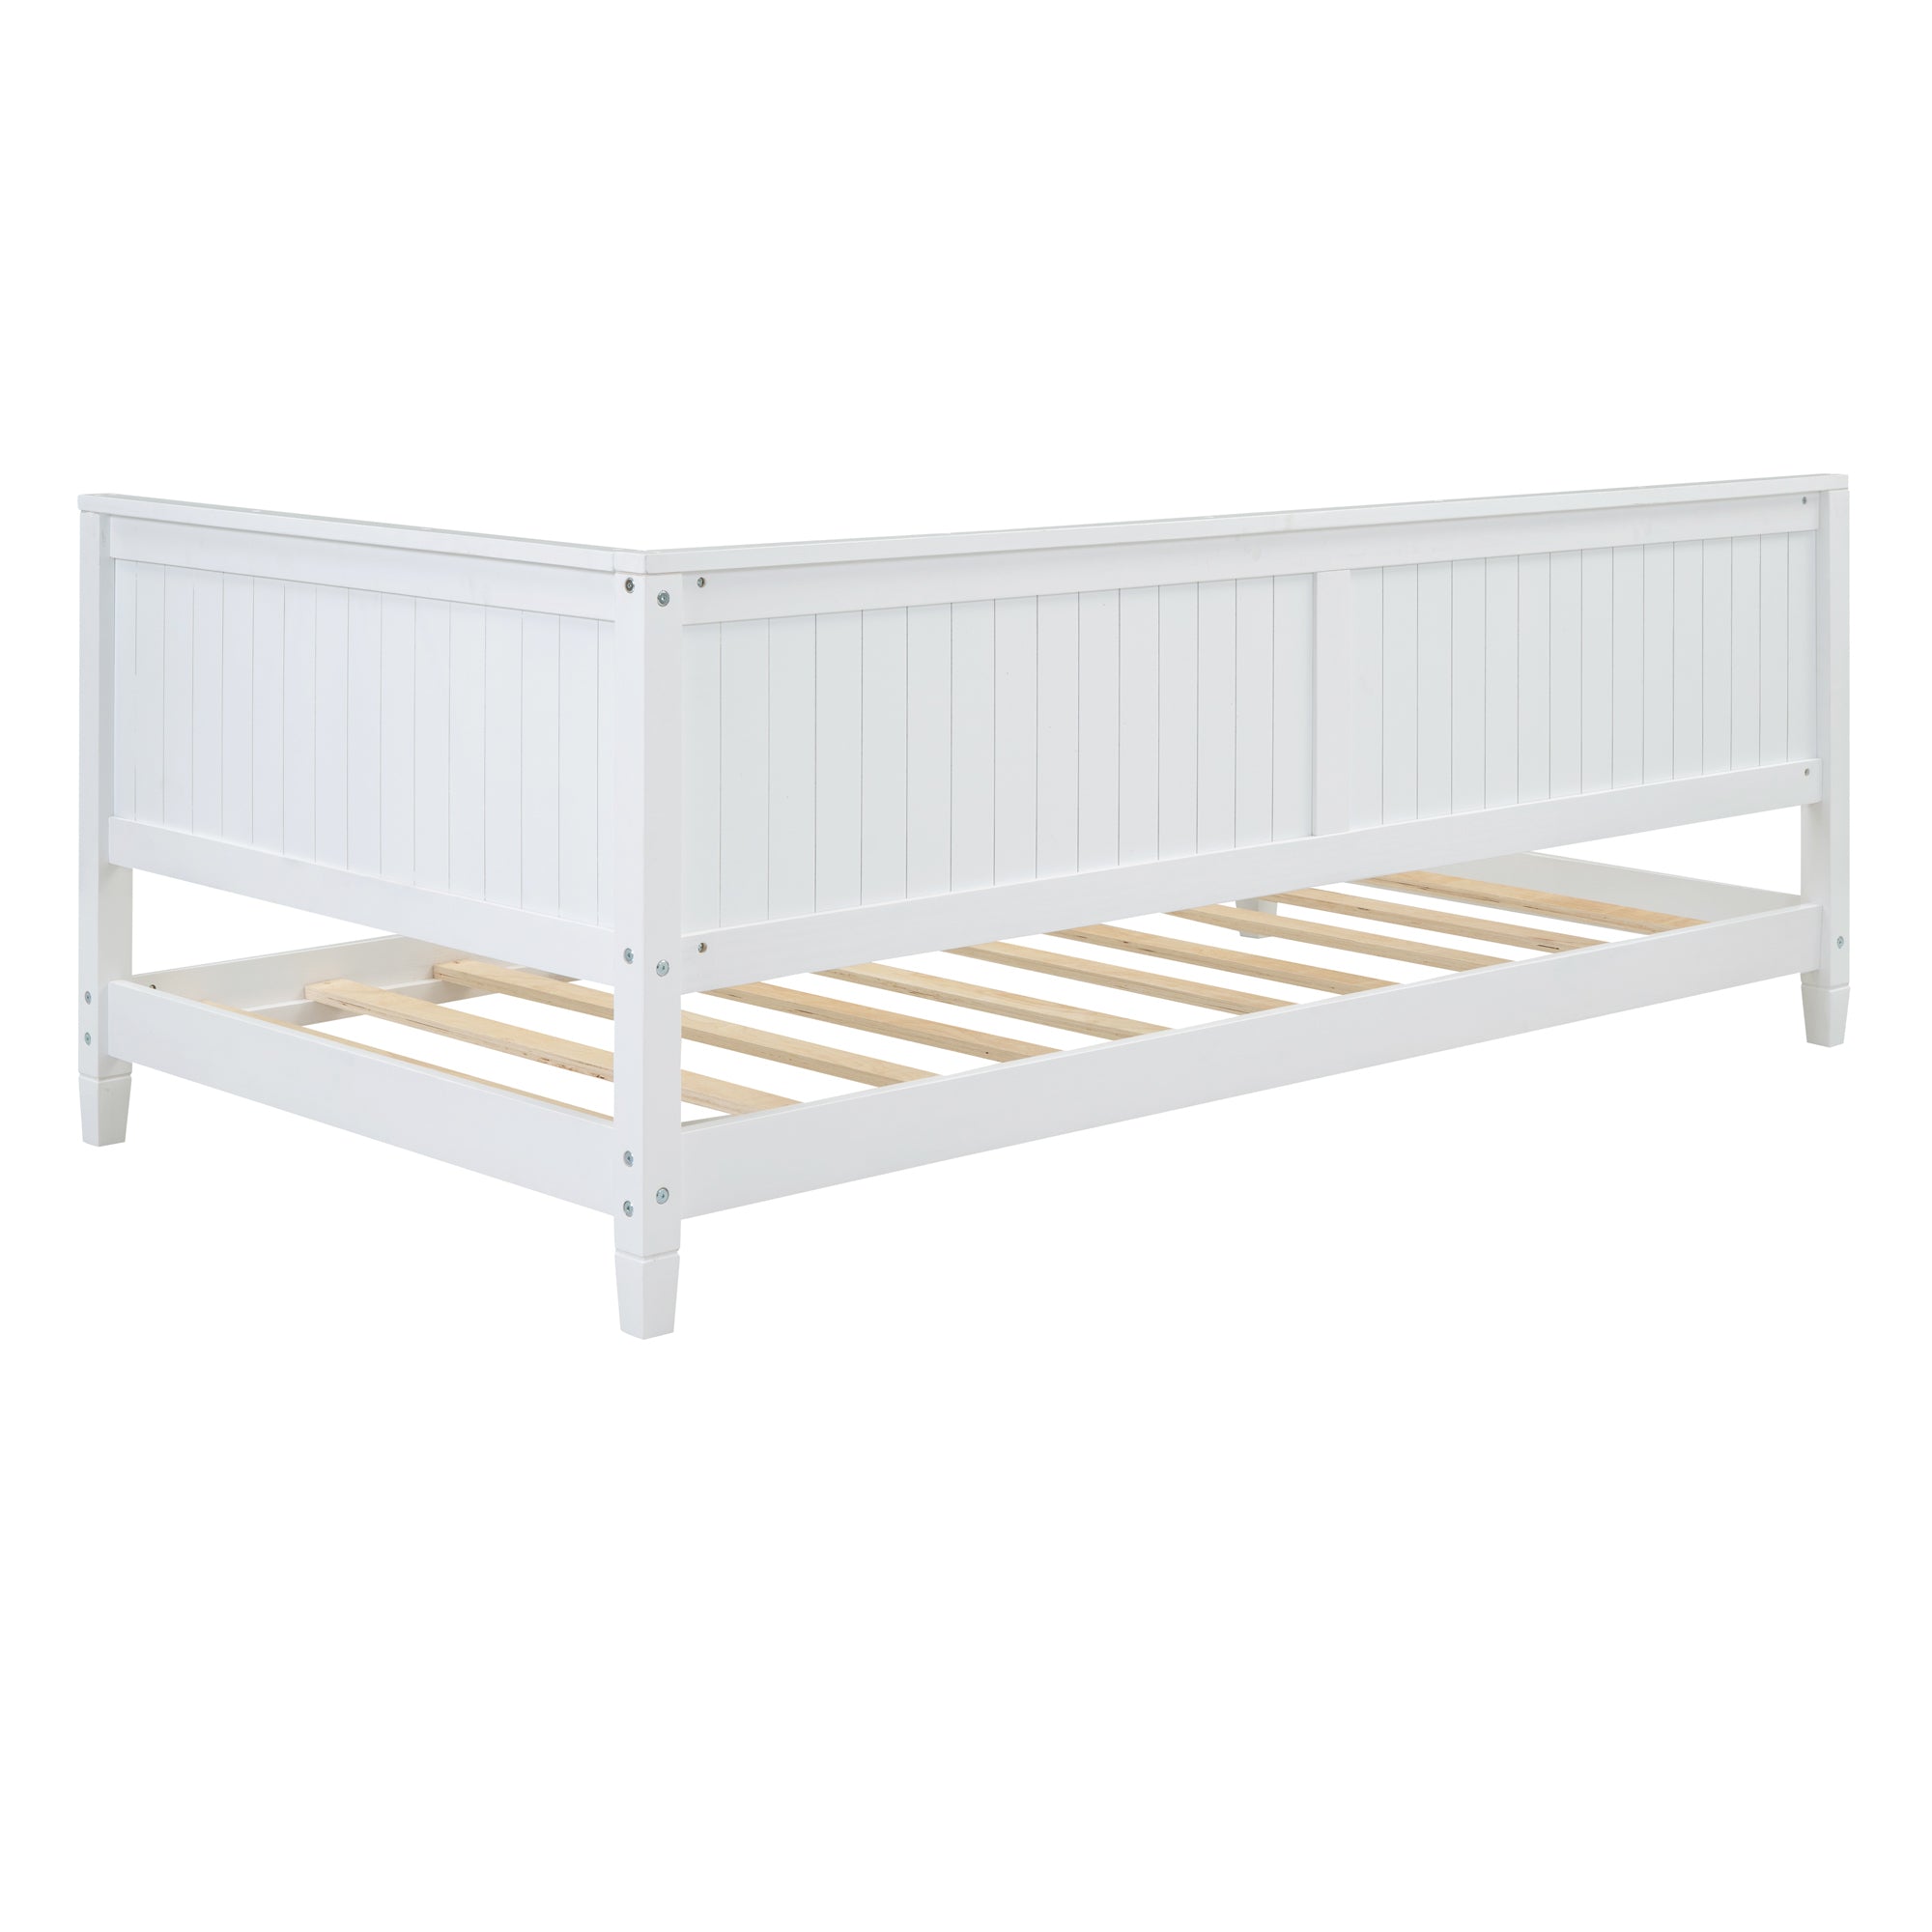 Twin Size Wood Daybed Sofa Bed, White white-solid wood+mdf